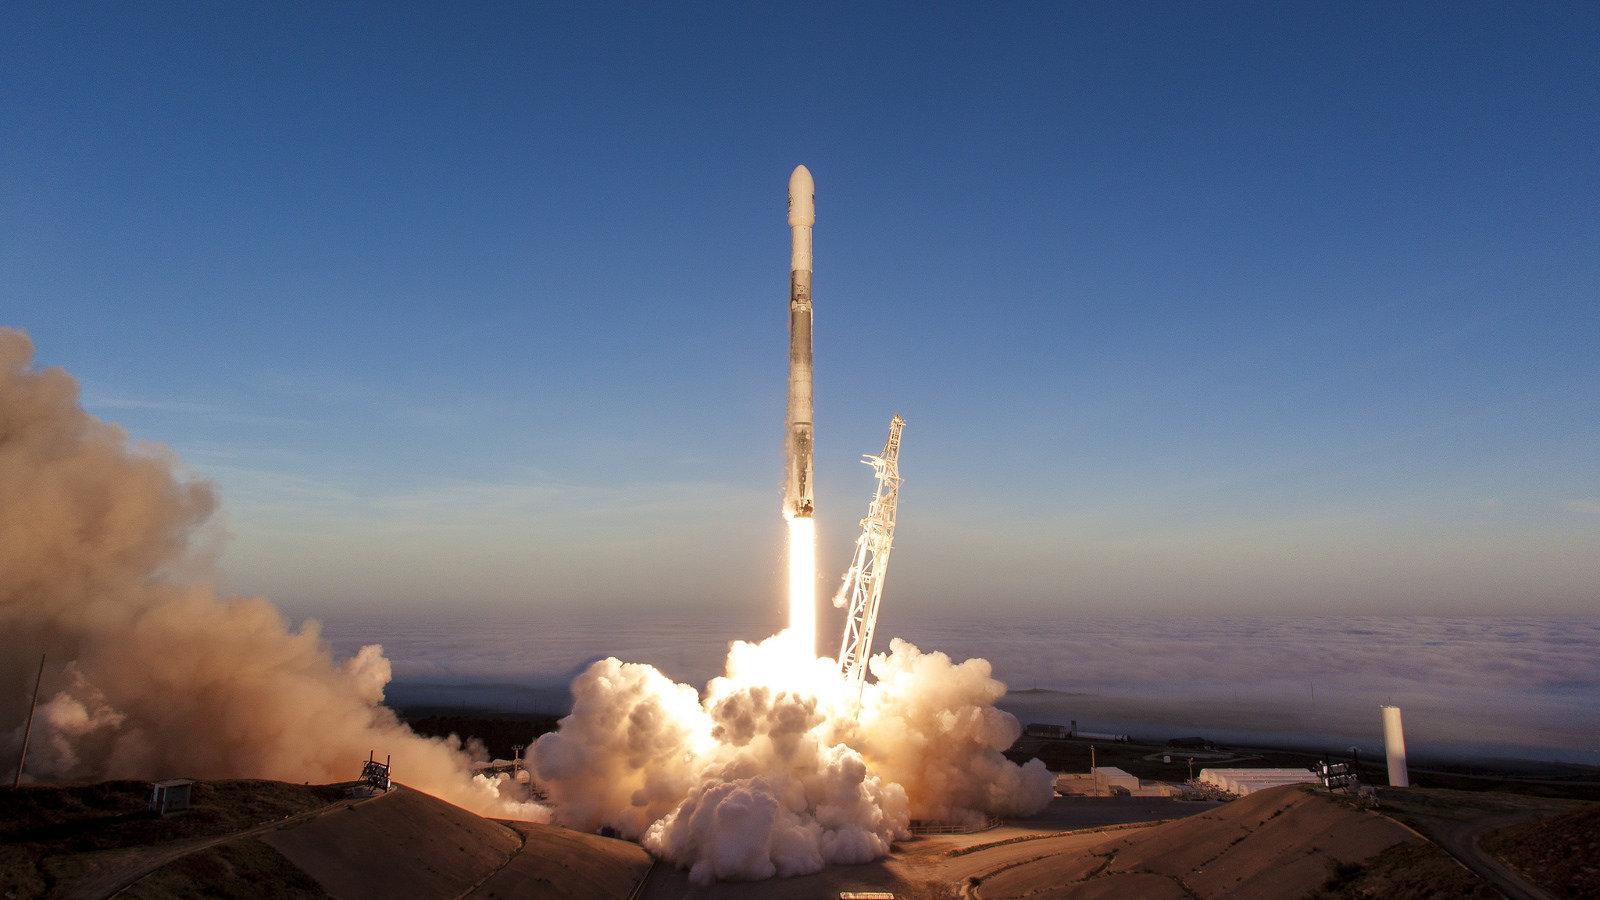 SpaceX cut its latest Falcon 9 stream because it didn't get a license